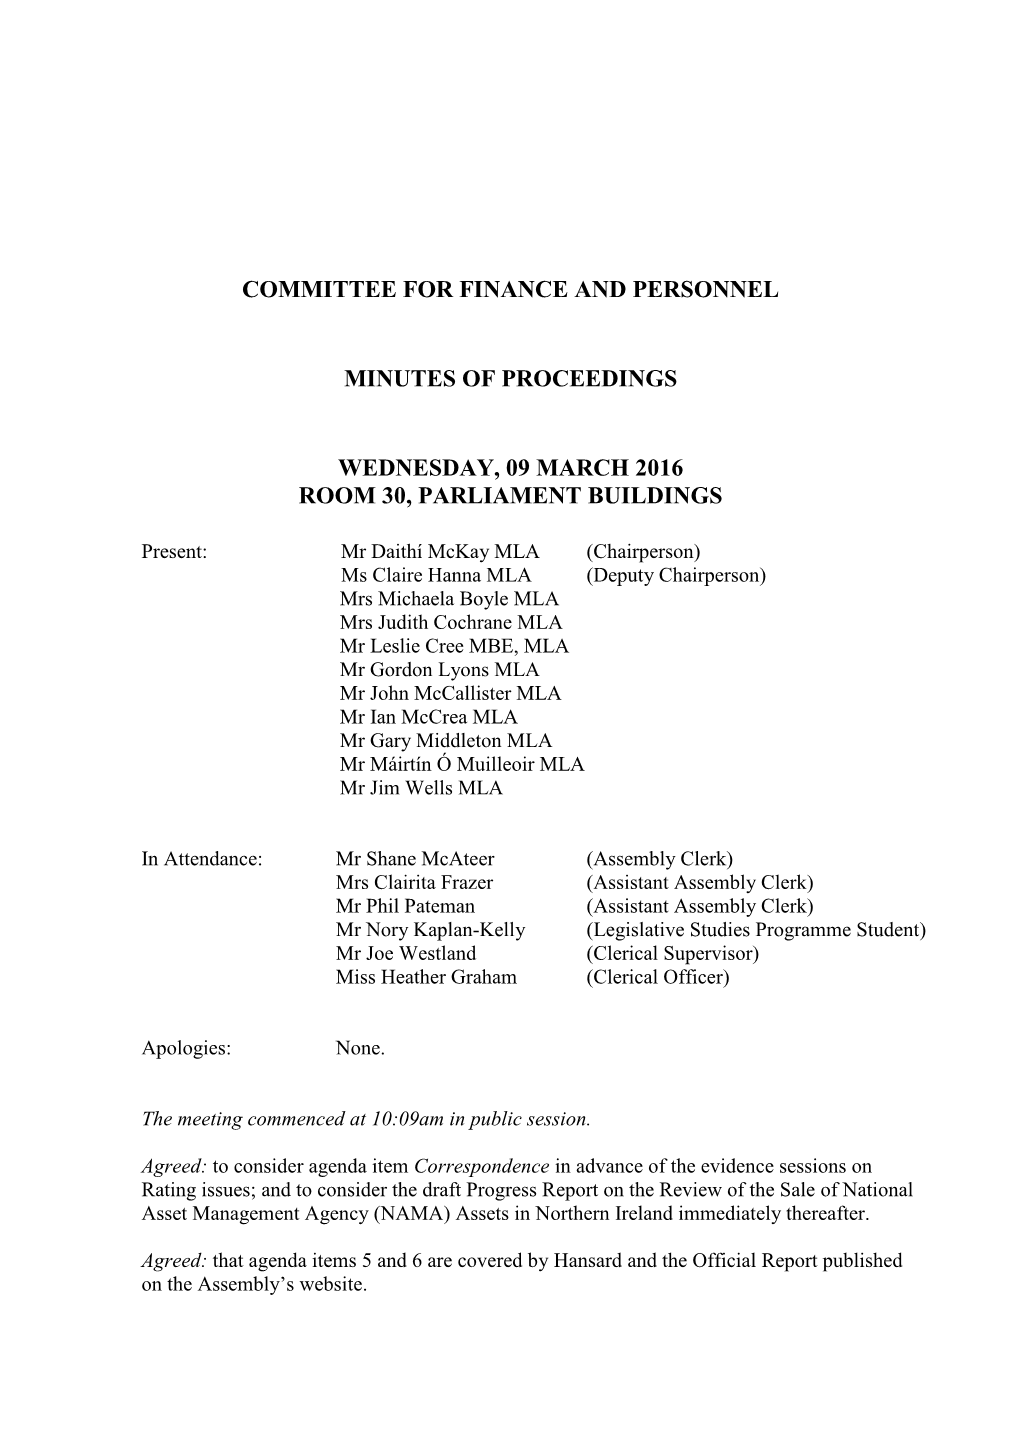 Committee for Finance and Personnel Minutes Of